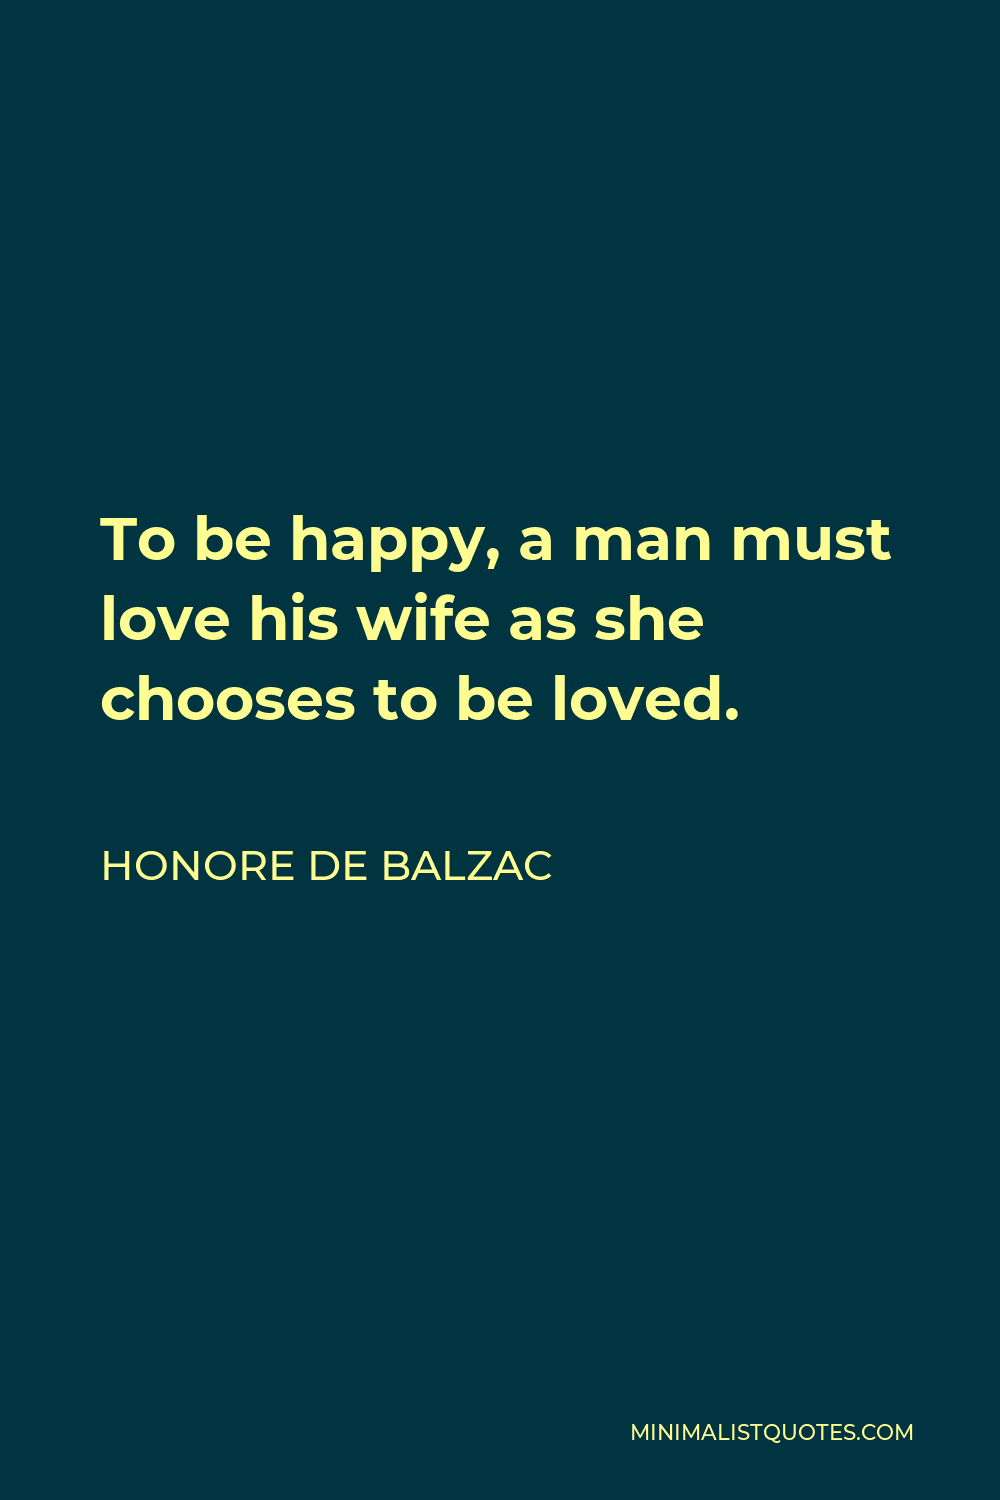 Honore de Balzac Quote - To be happy, a man must love his wife as she chooses to be loved.